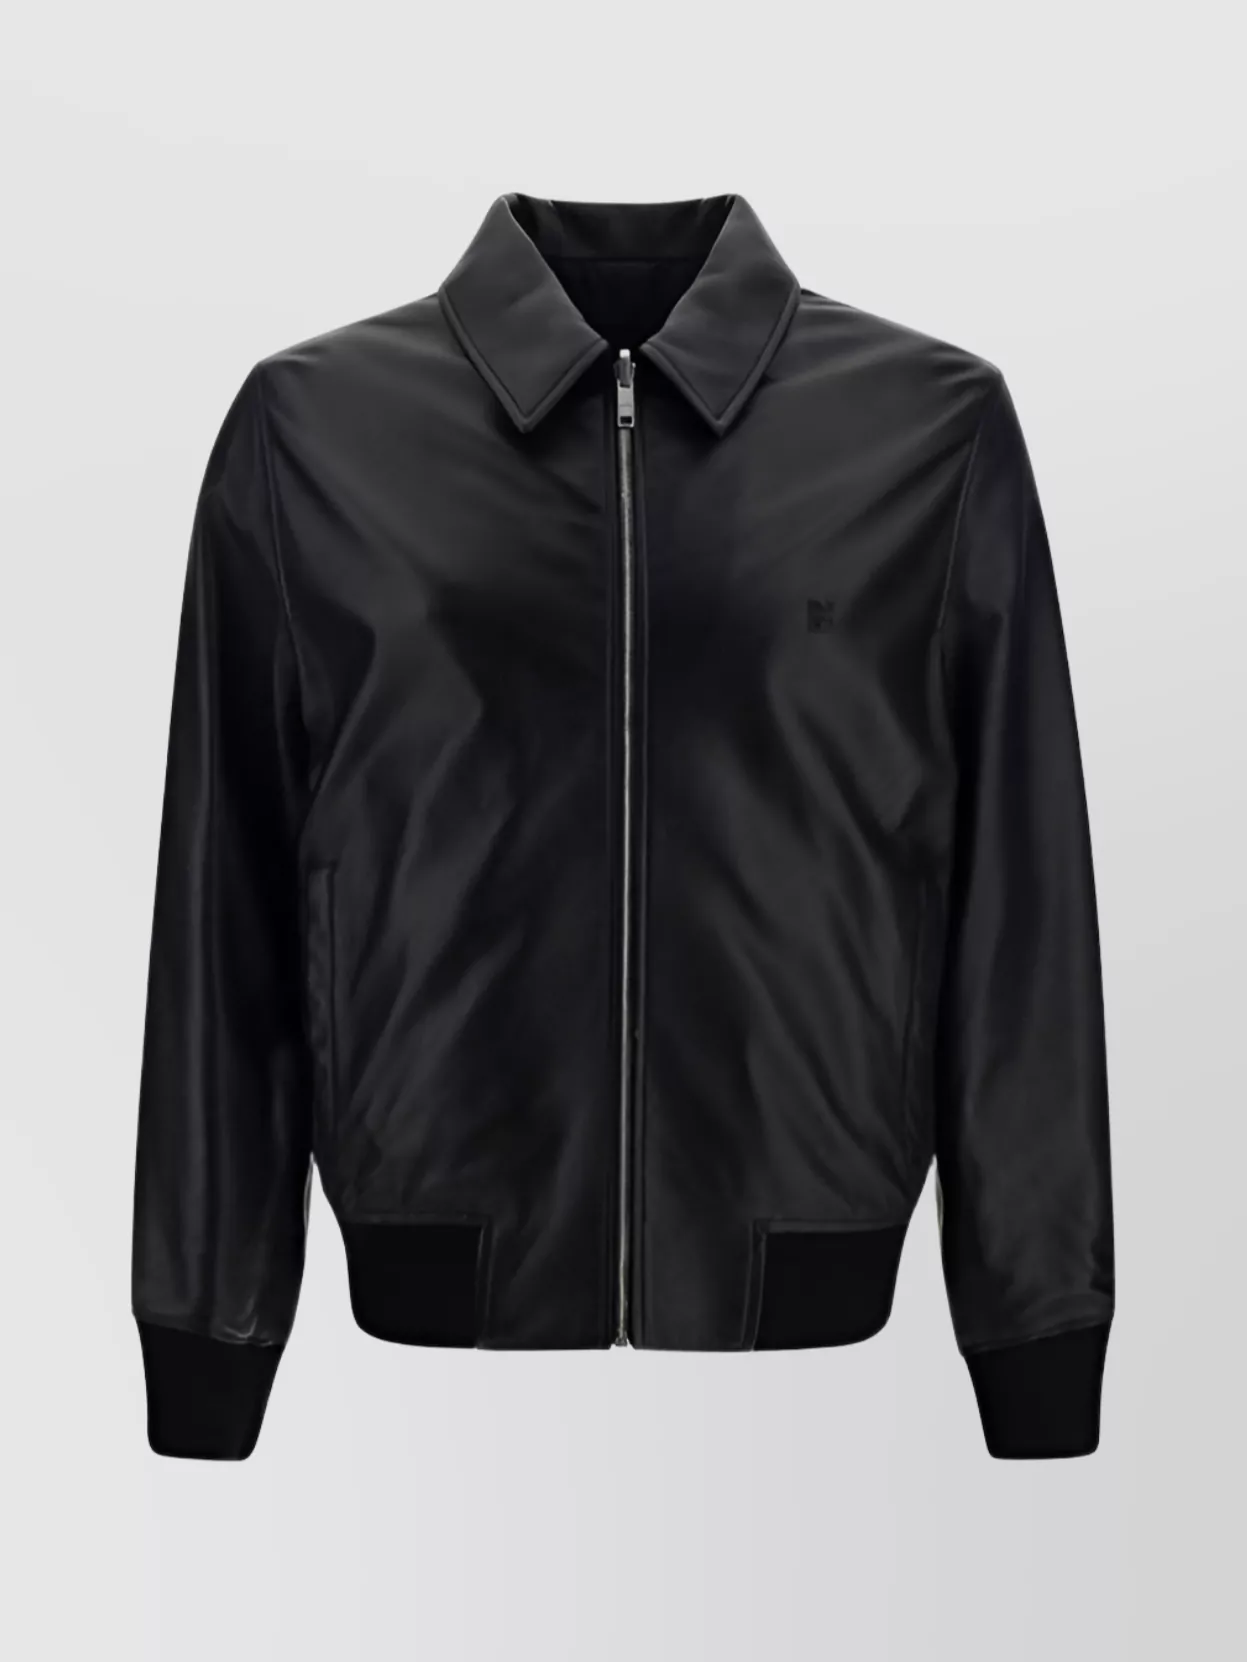 Givenchy Lambskin Jacket With Elasticized Regular Fit In Black